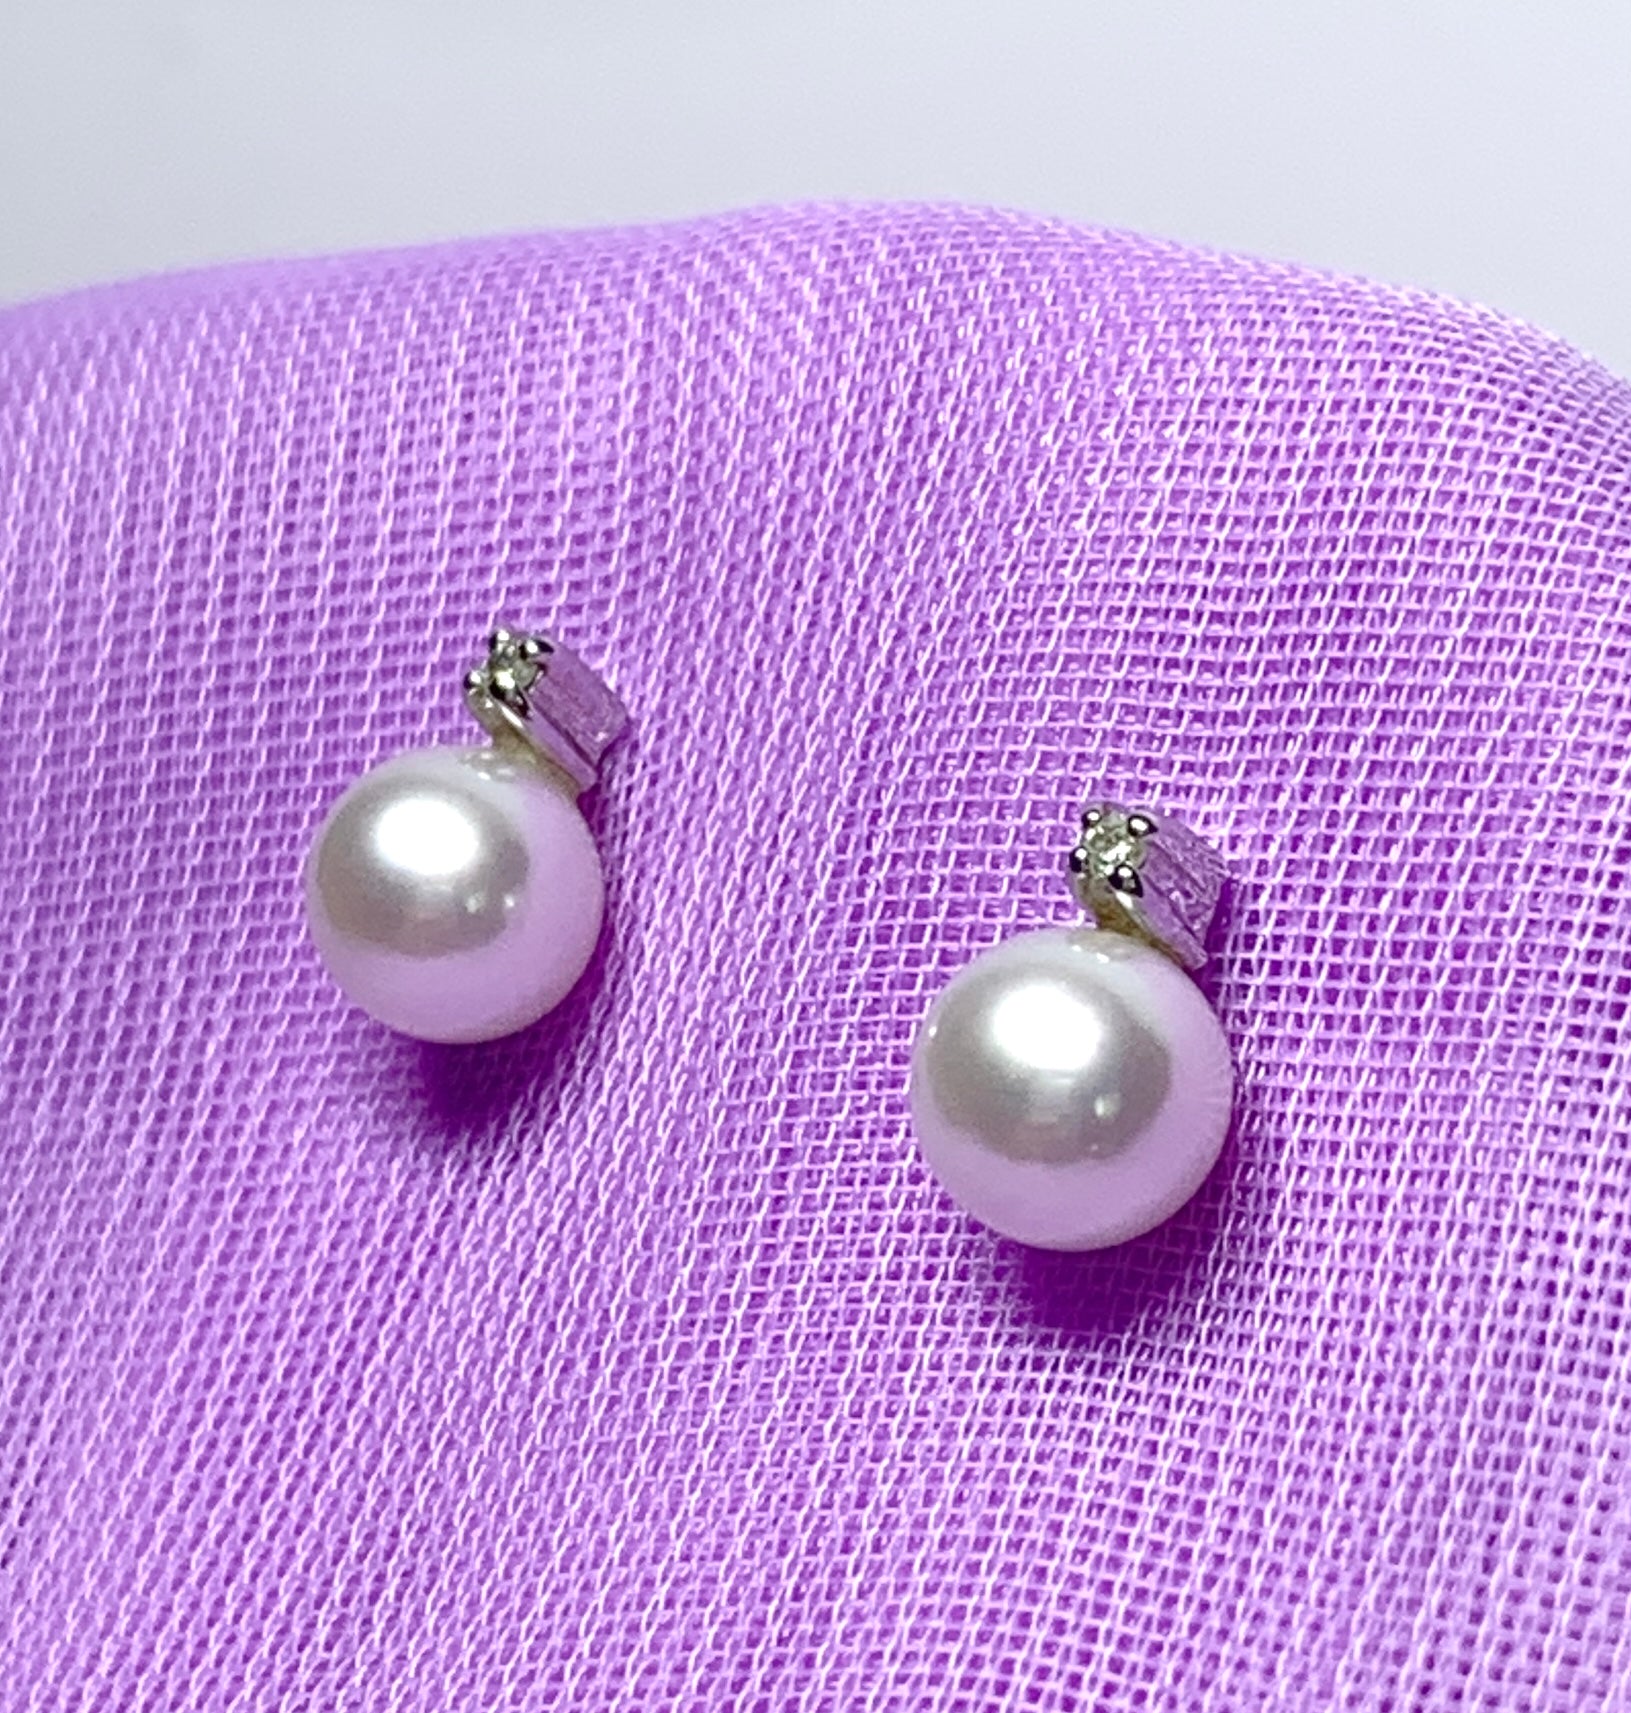 Cultured pearl and diamond stud earrings white gold